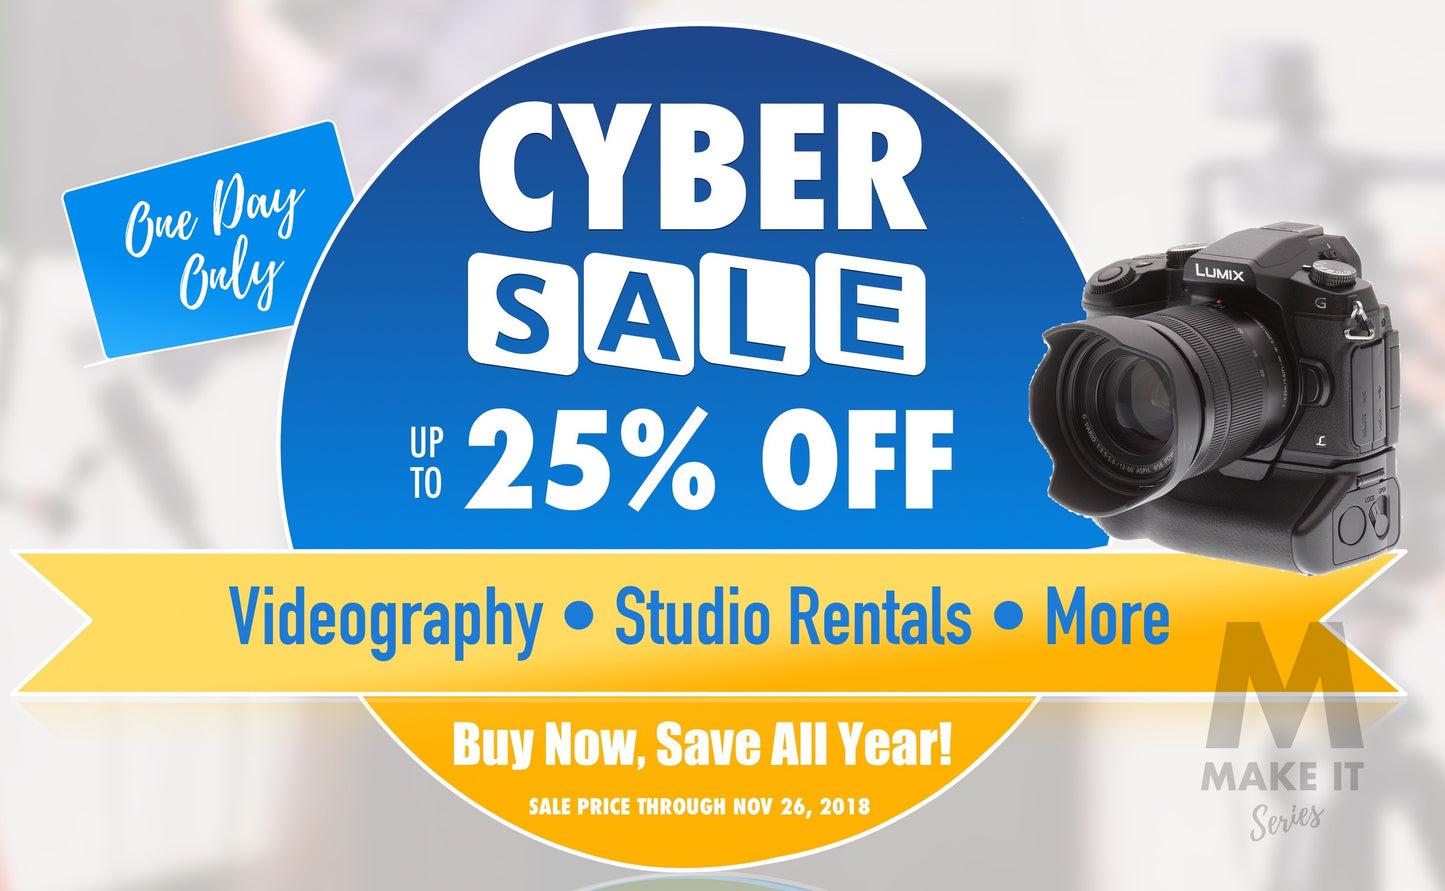 Cyber SALE – Save Up To $5,000 On Video Production & More!